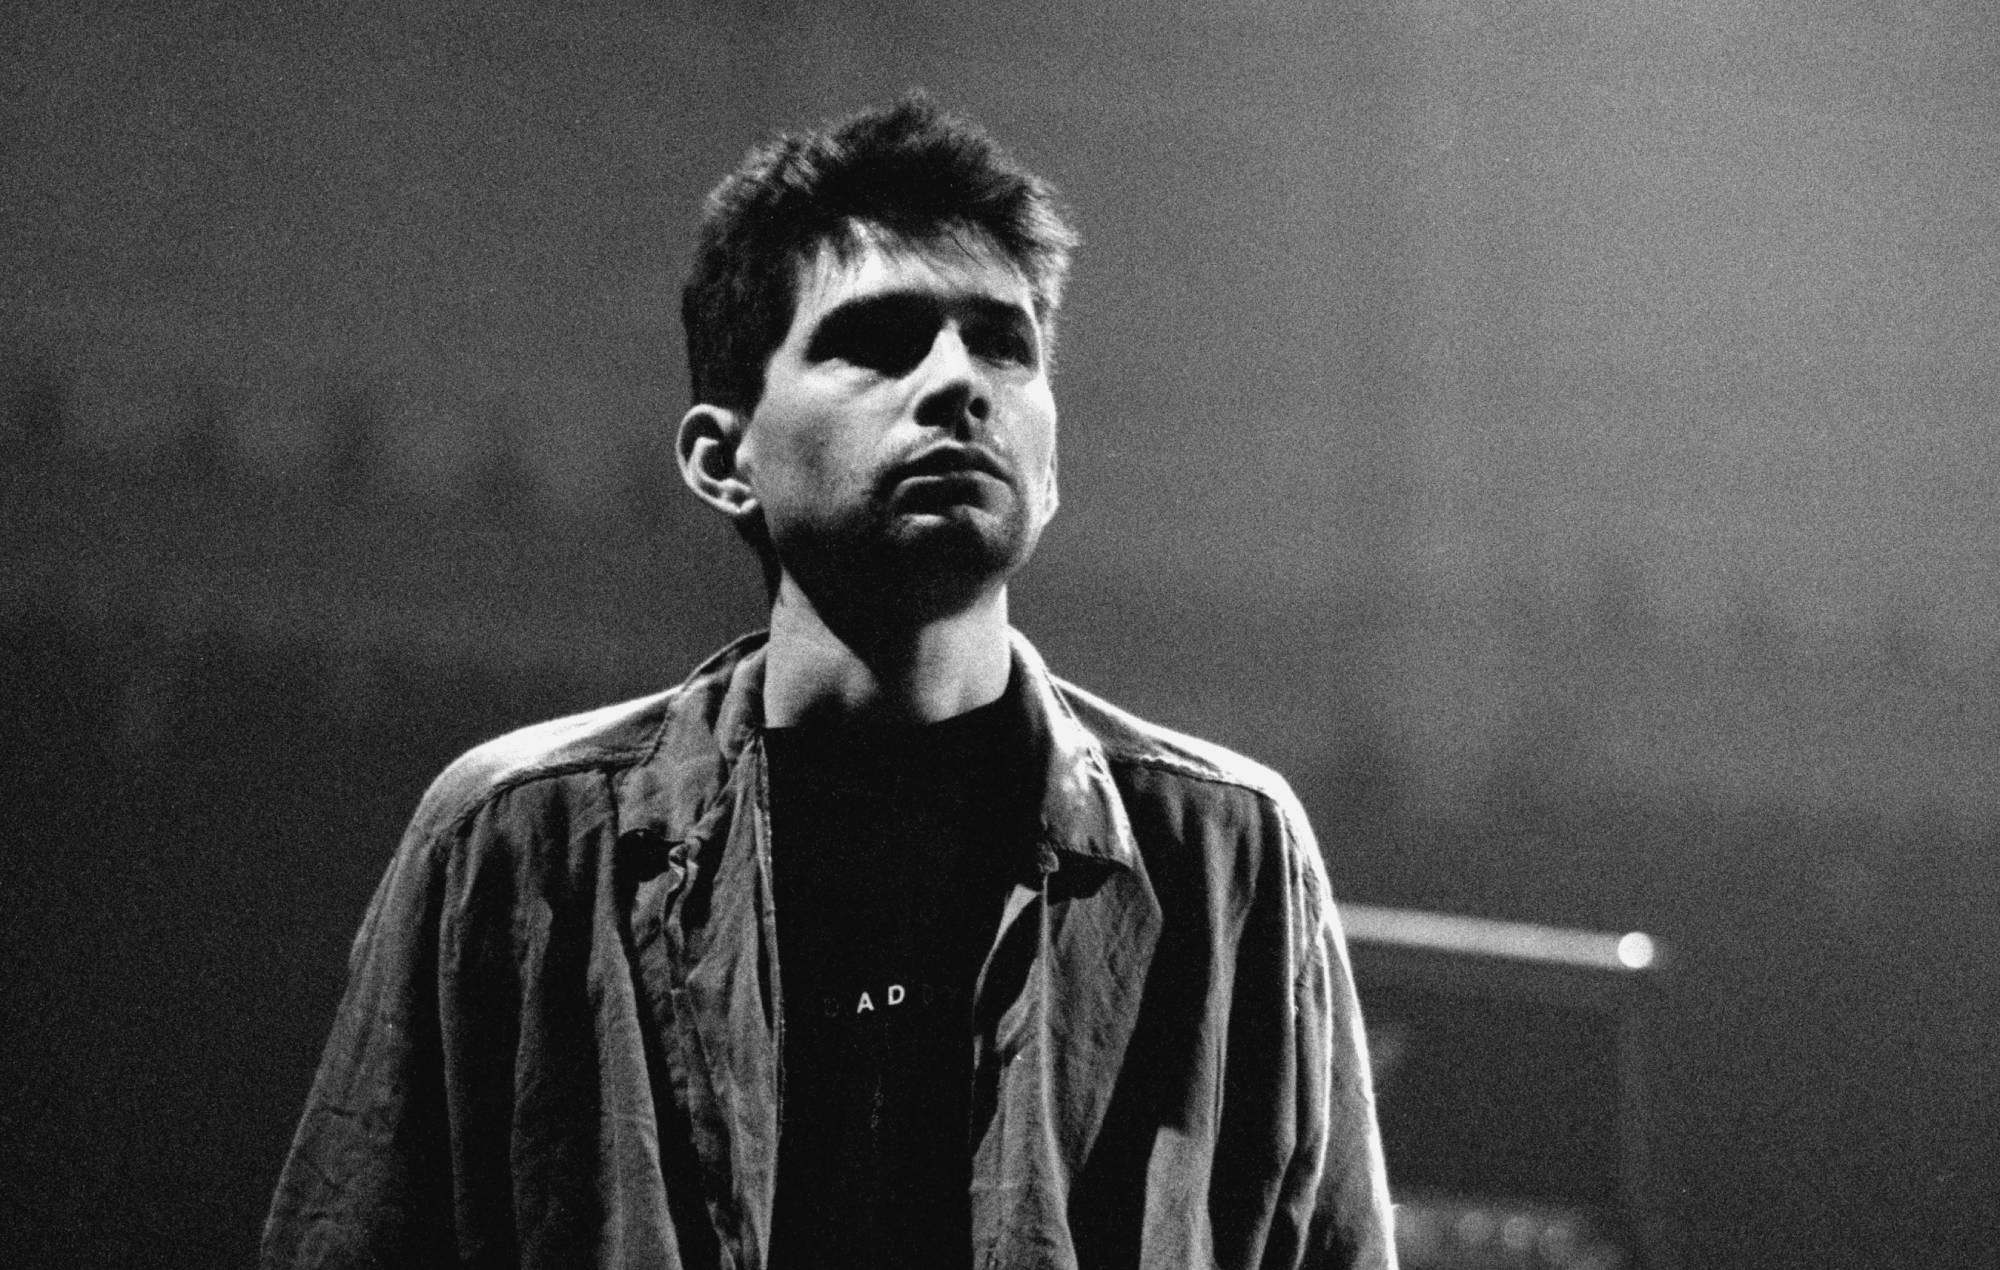 Legendary record producer Steve Albini has died, aged 61